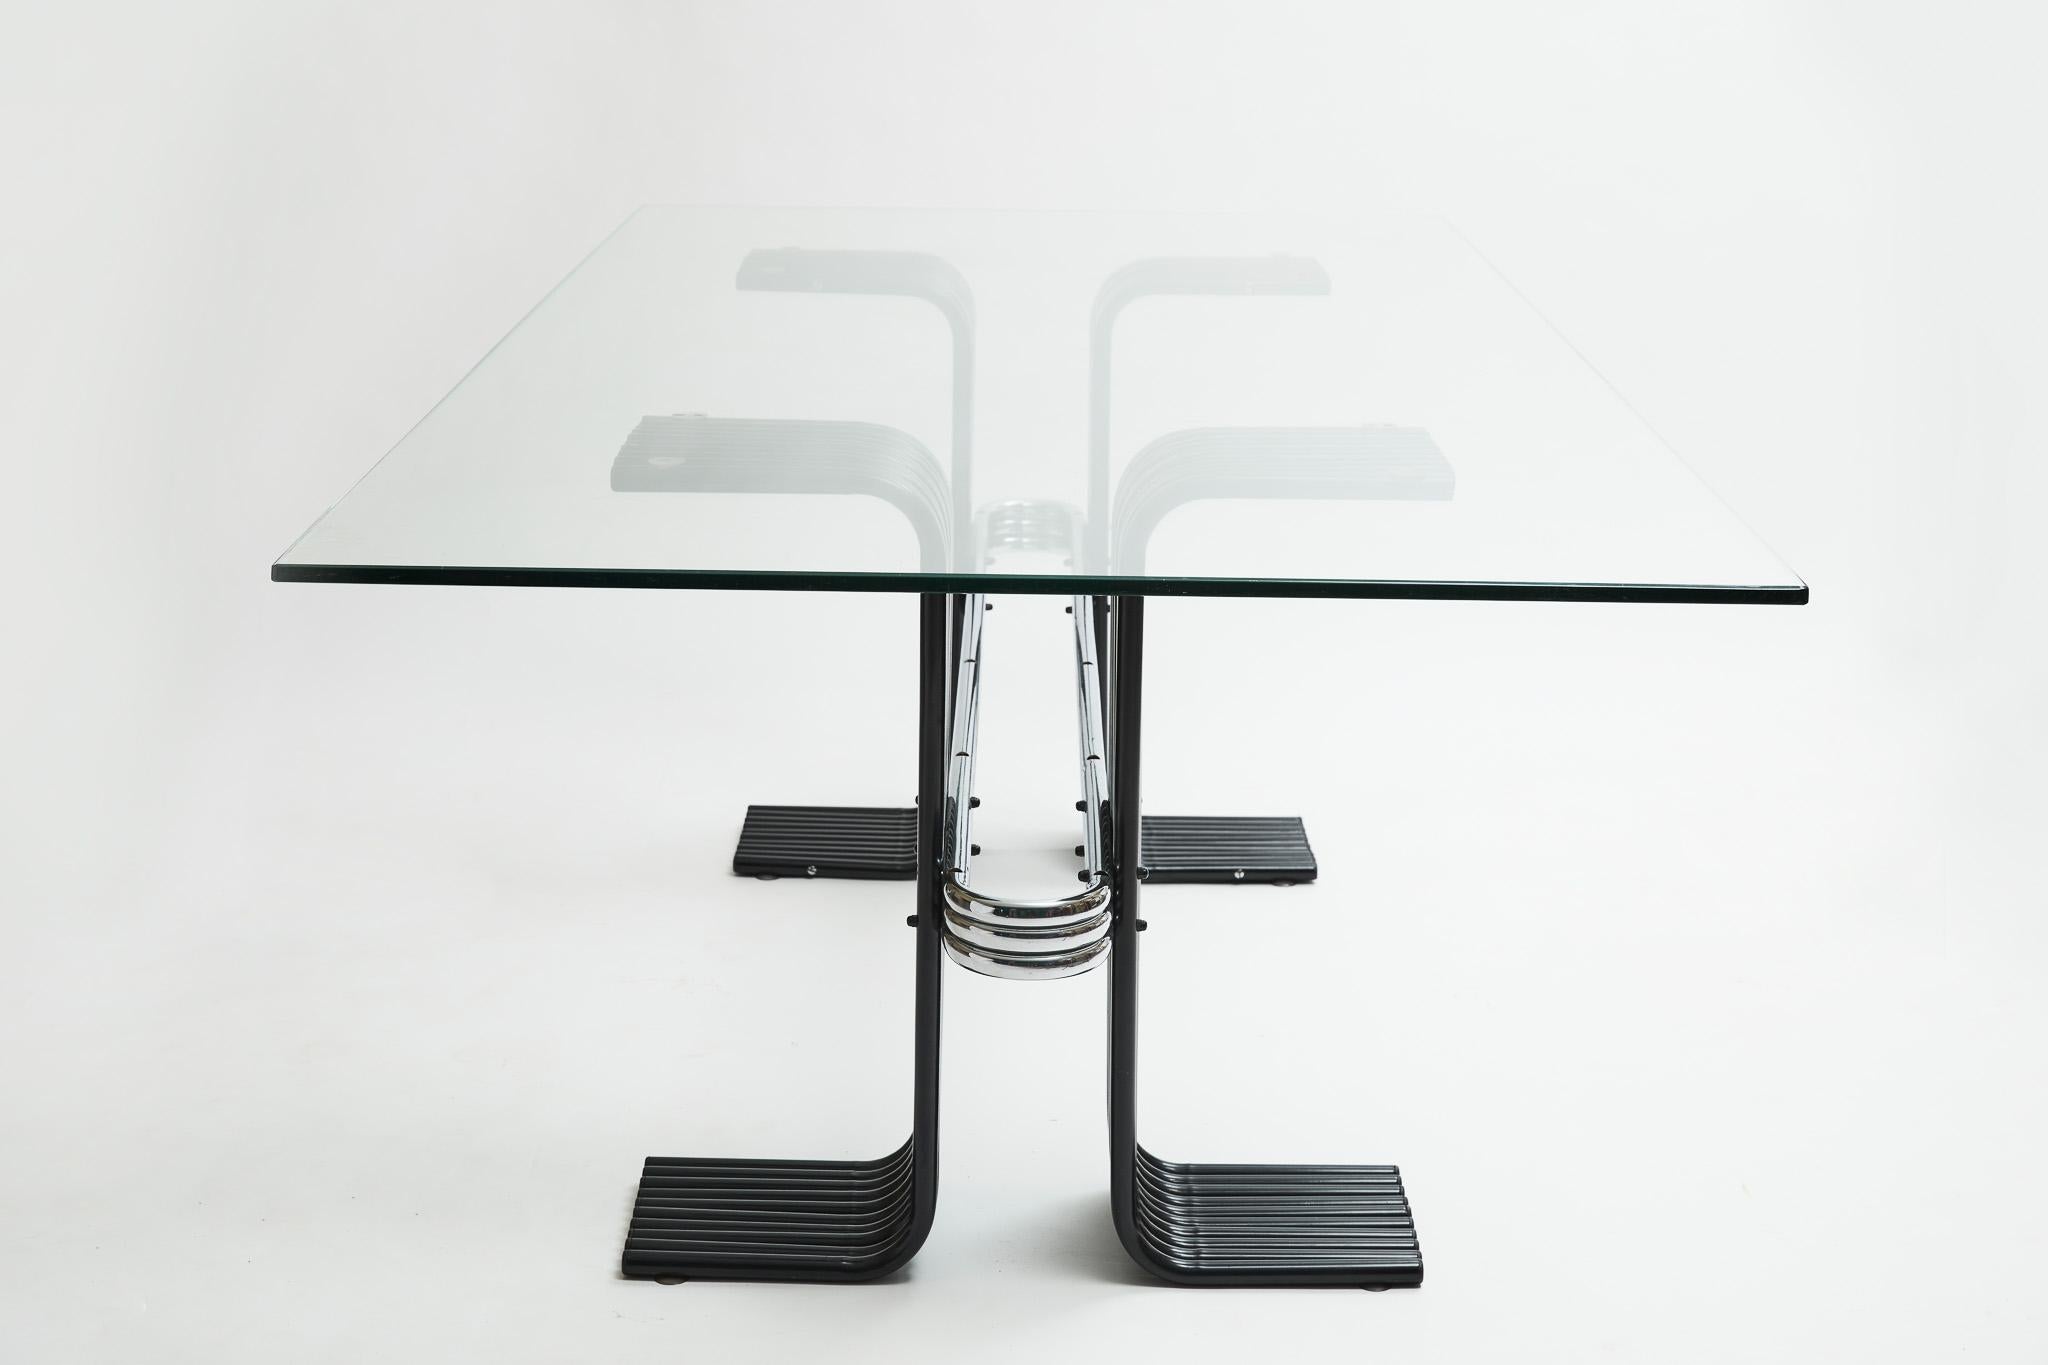 Metalwork Brazilian Modern Dining Table in Black Painted Iron, Chrome & Glass, Forma, 1970 For Sale